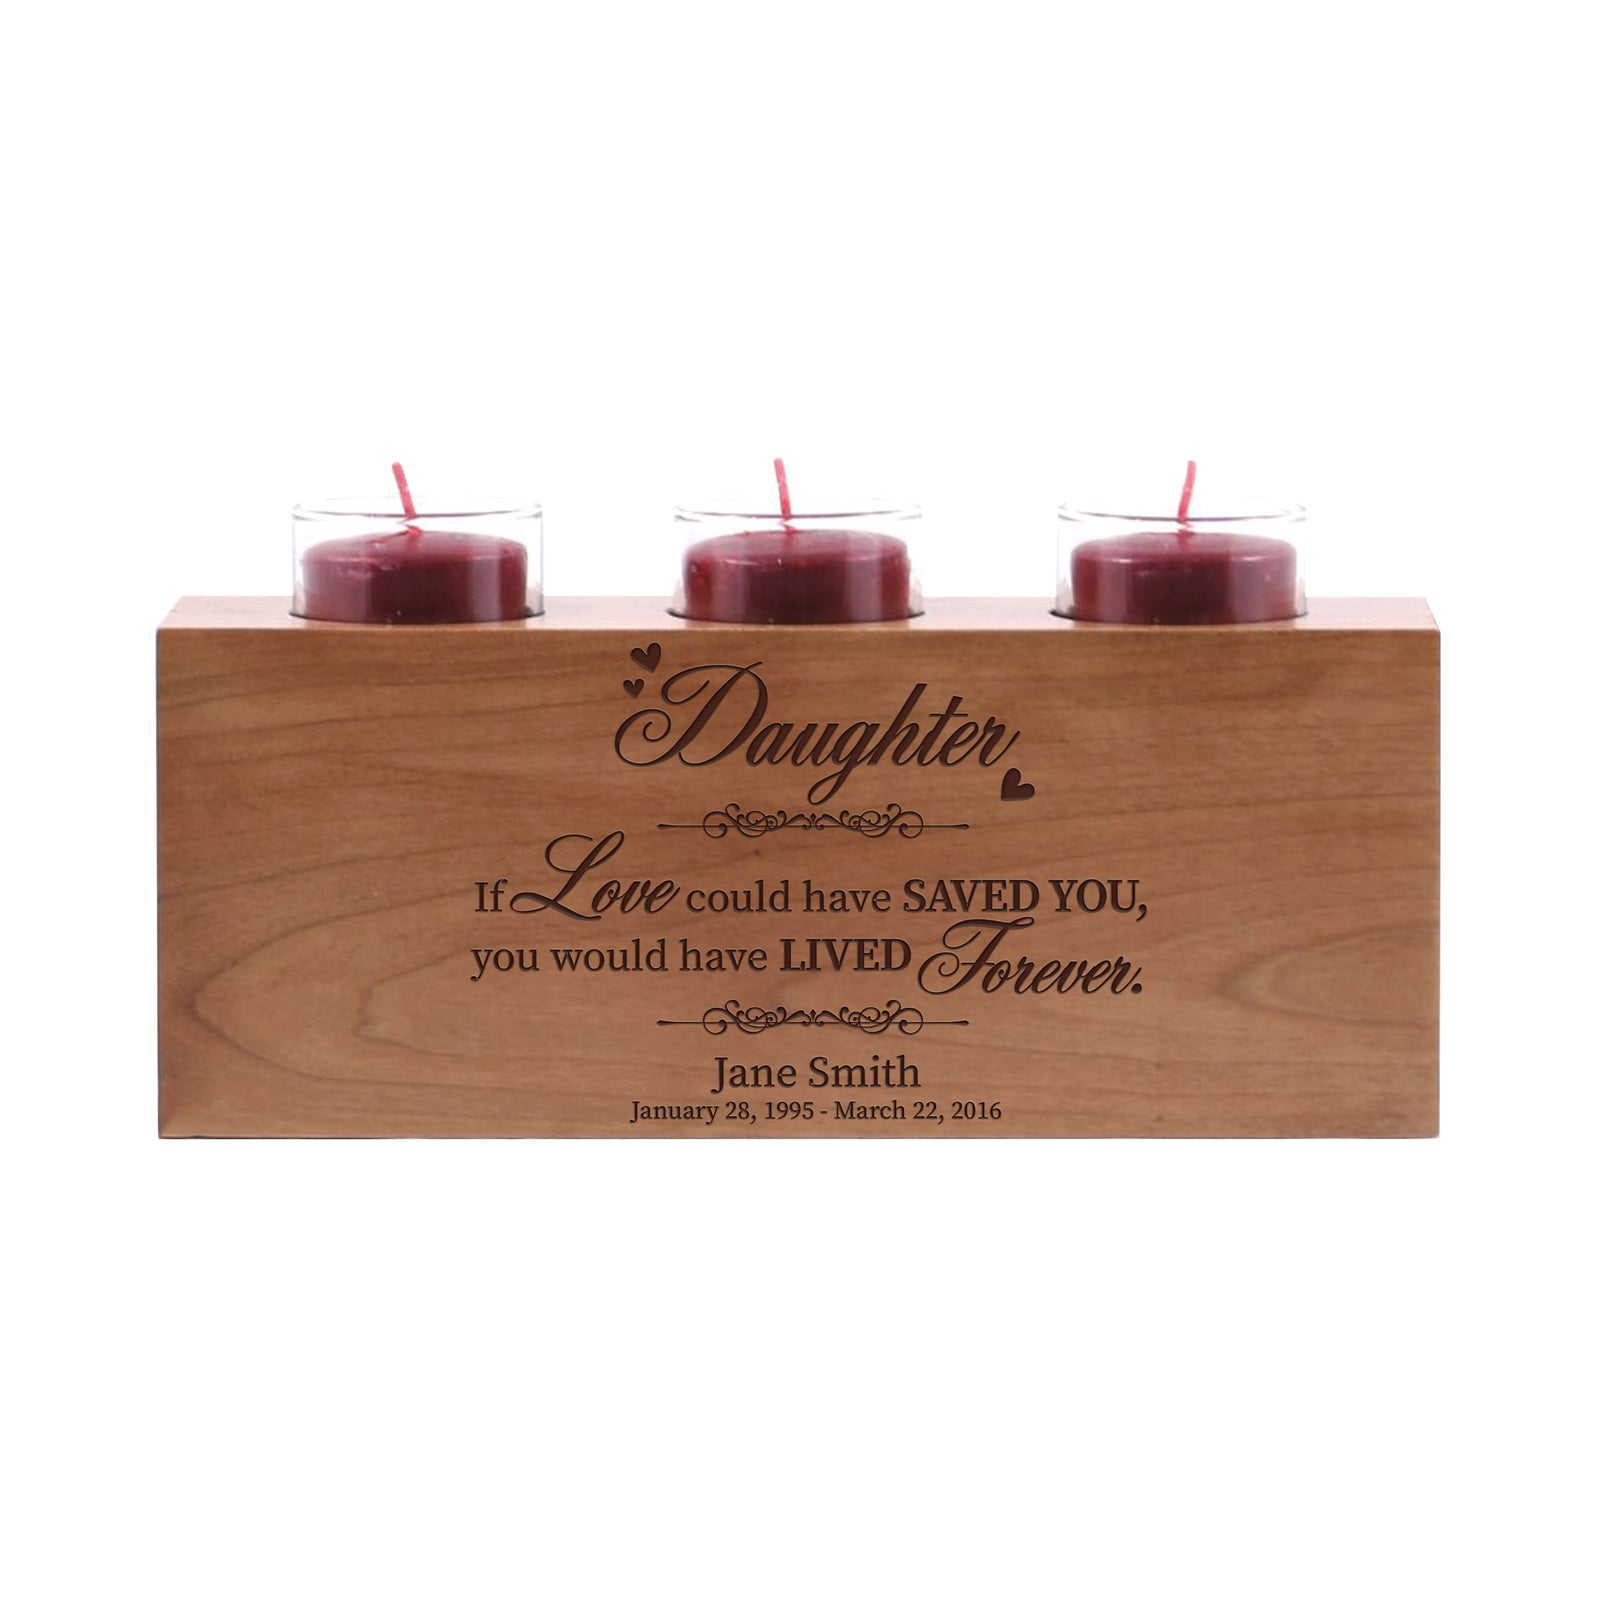 LifeSong Milestones Personalized Memorial Sympathy 3 Votive Candle Holder - Daugther, If Love Could Engraved Tea Light Candle Loss of Loved One Gift - 10” x 4” x 4”.